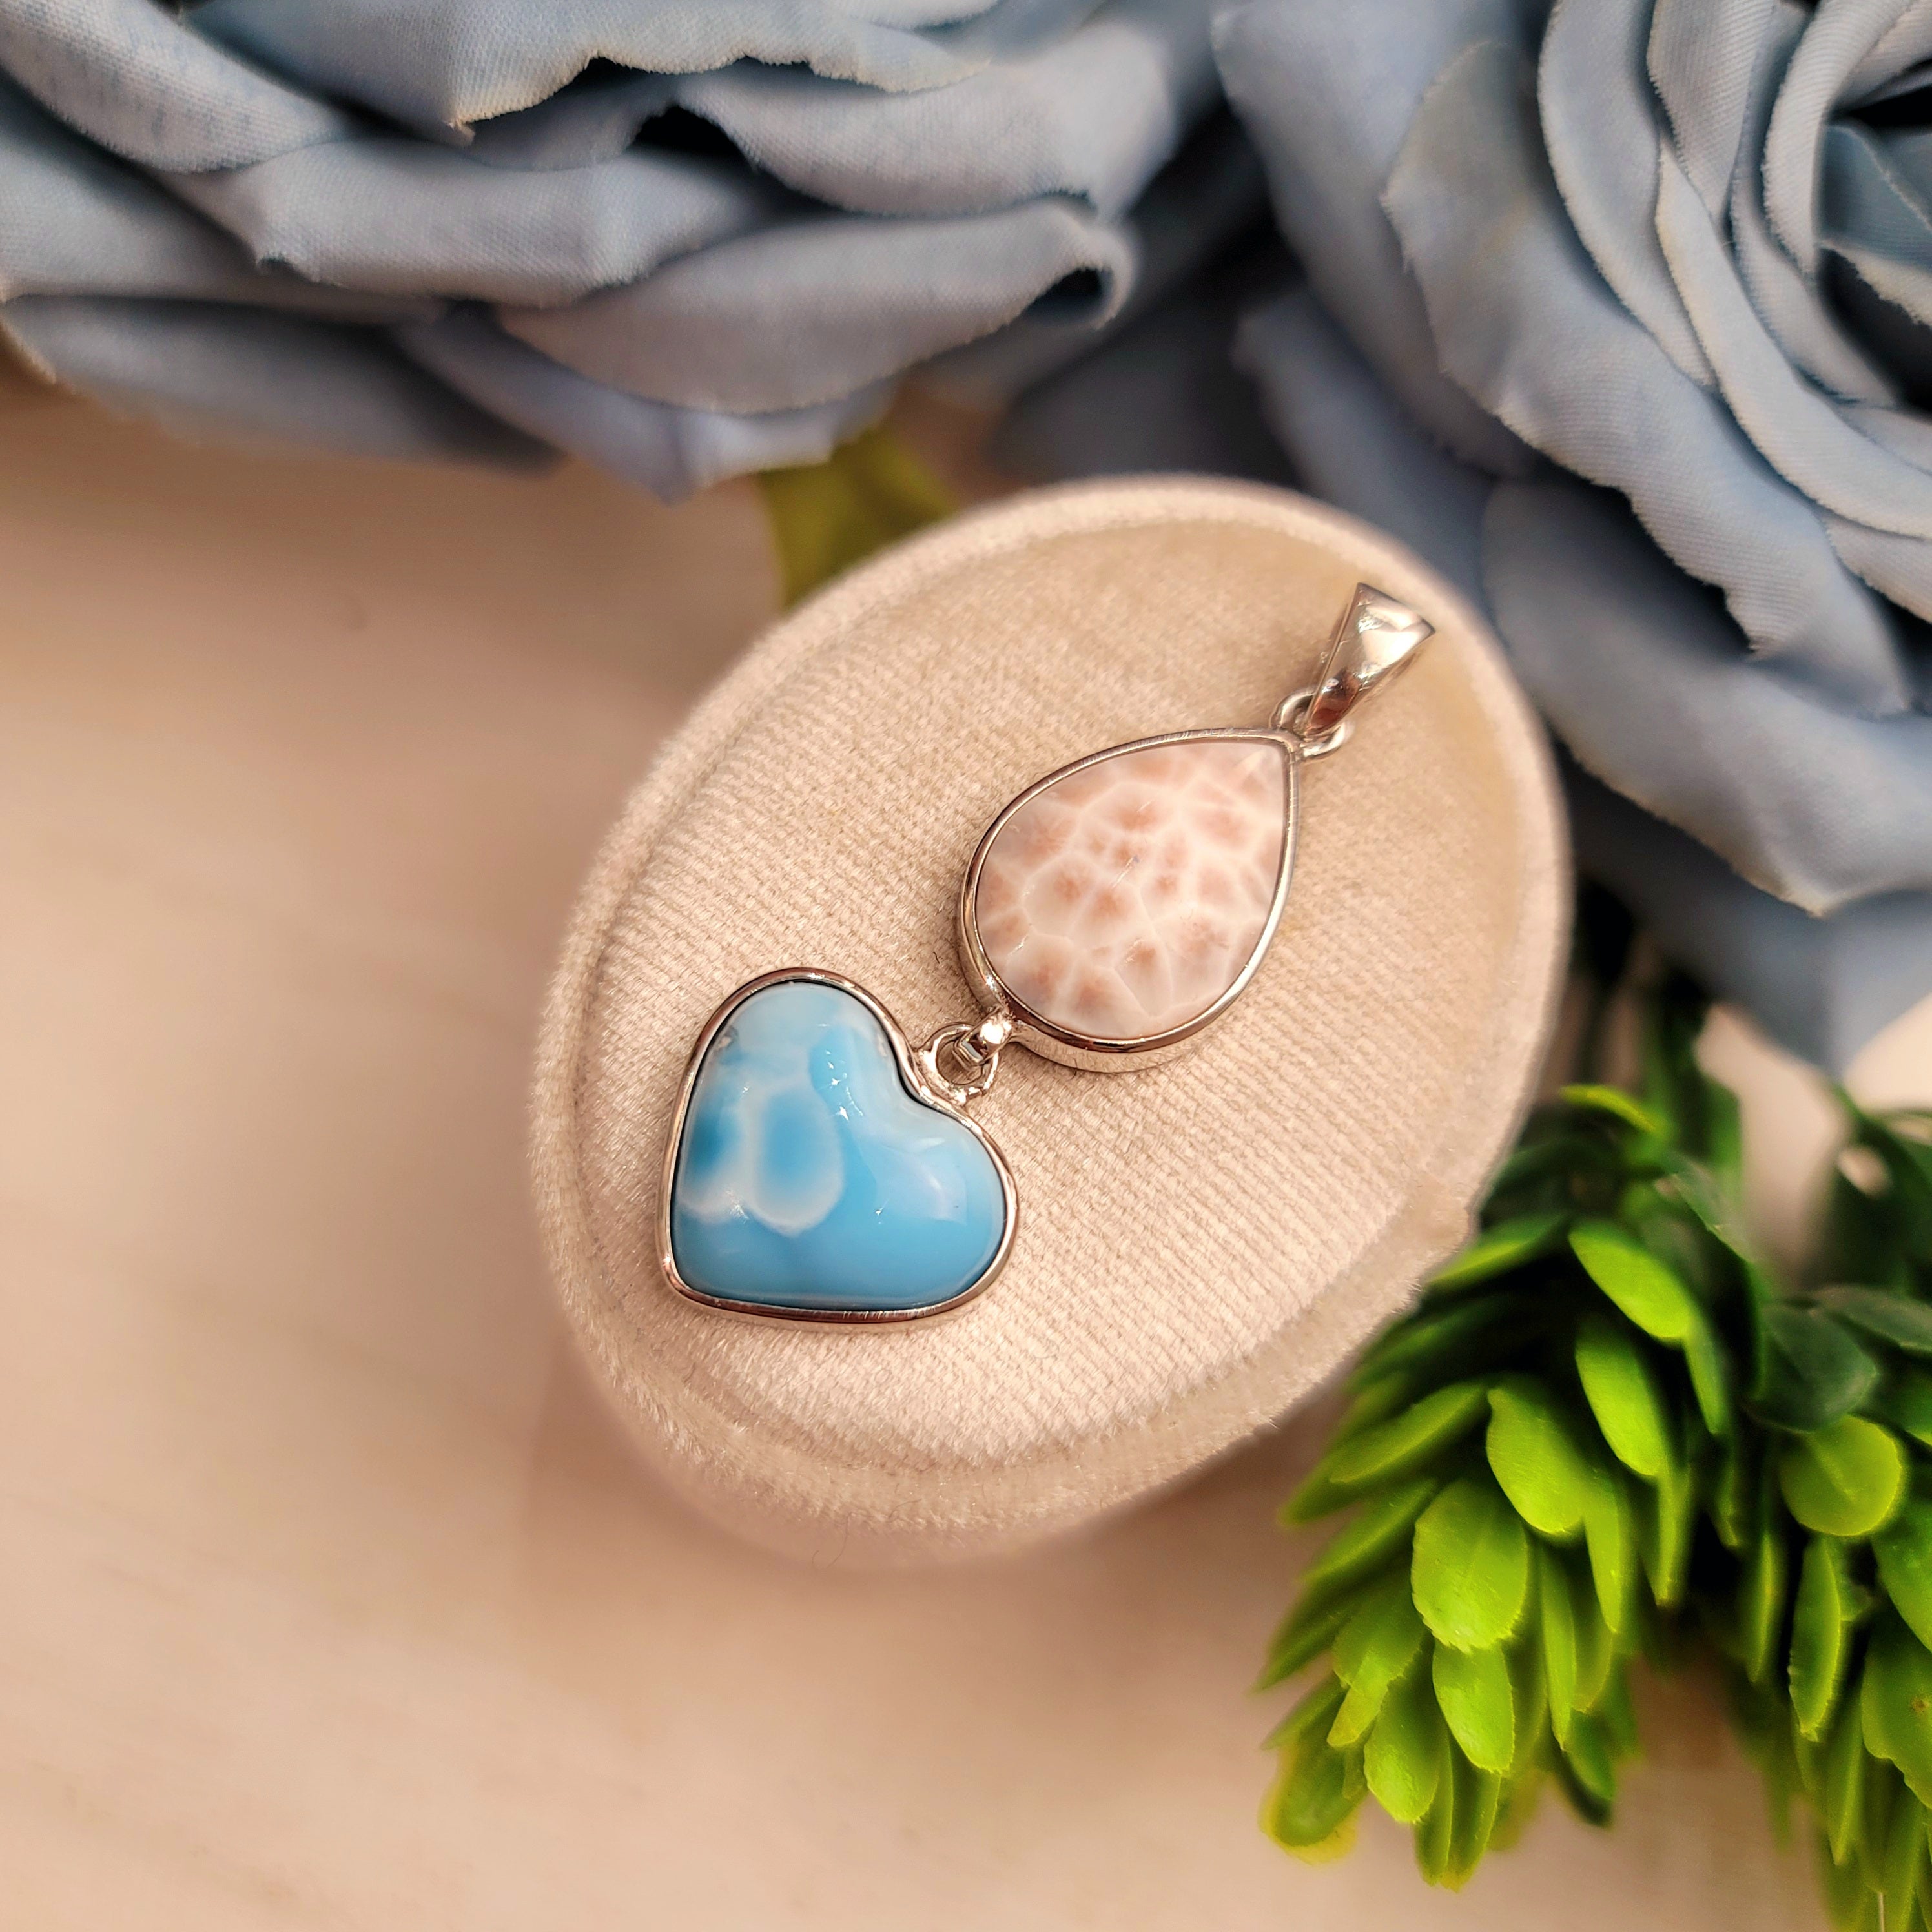 Larimar Heart and Natrolite Pendant for Awakening your Intuitive Powers and Tranquility